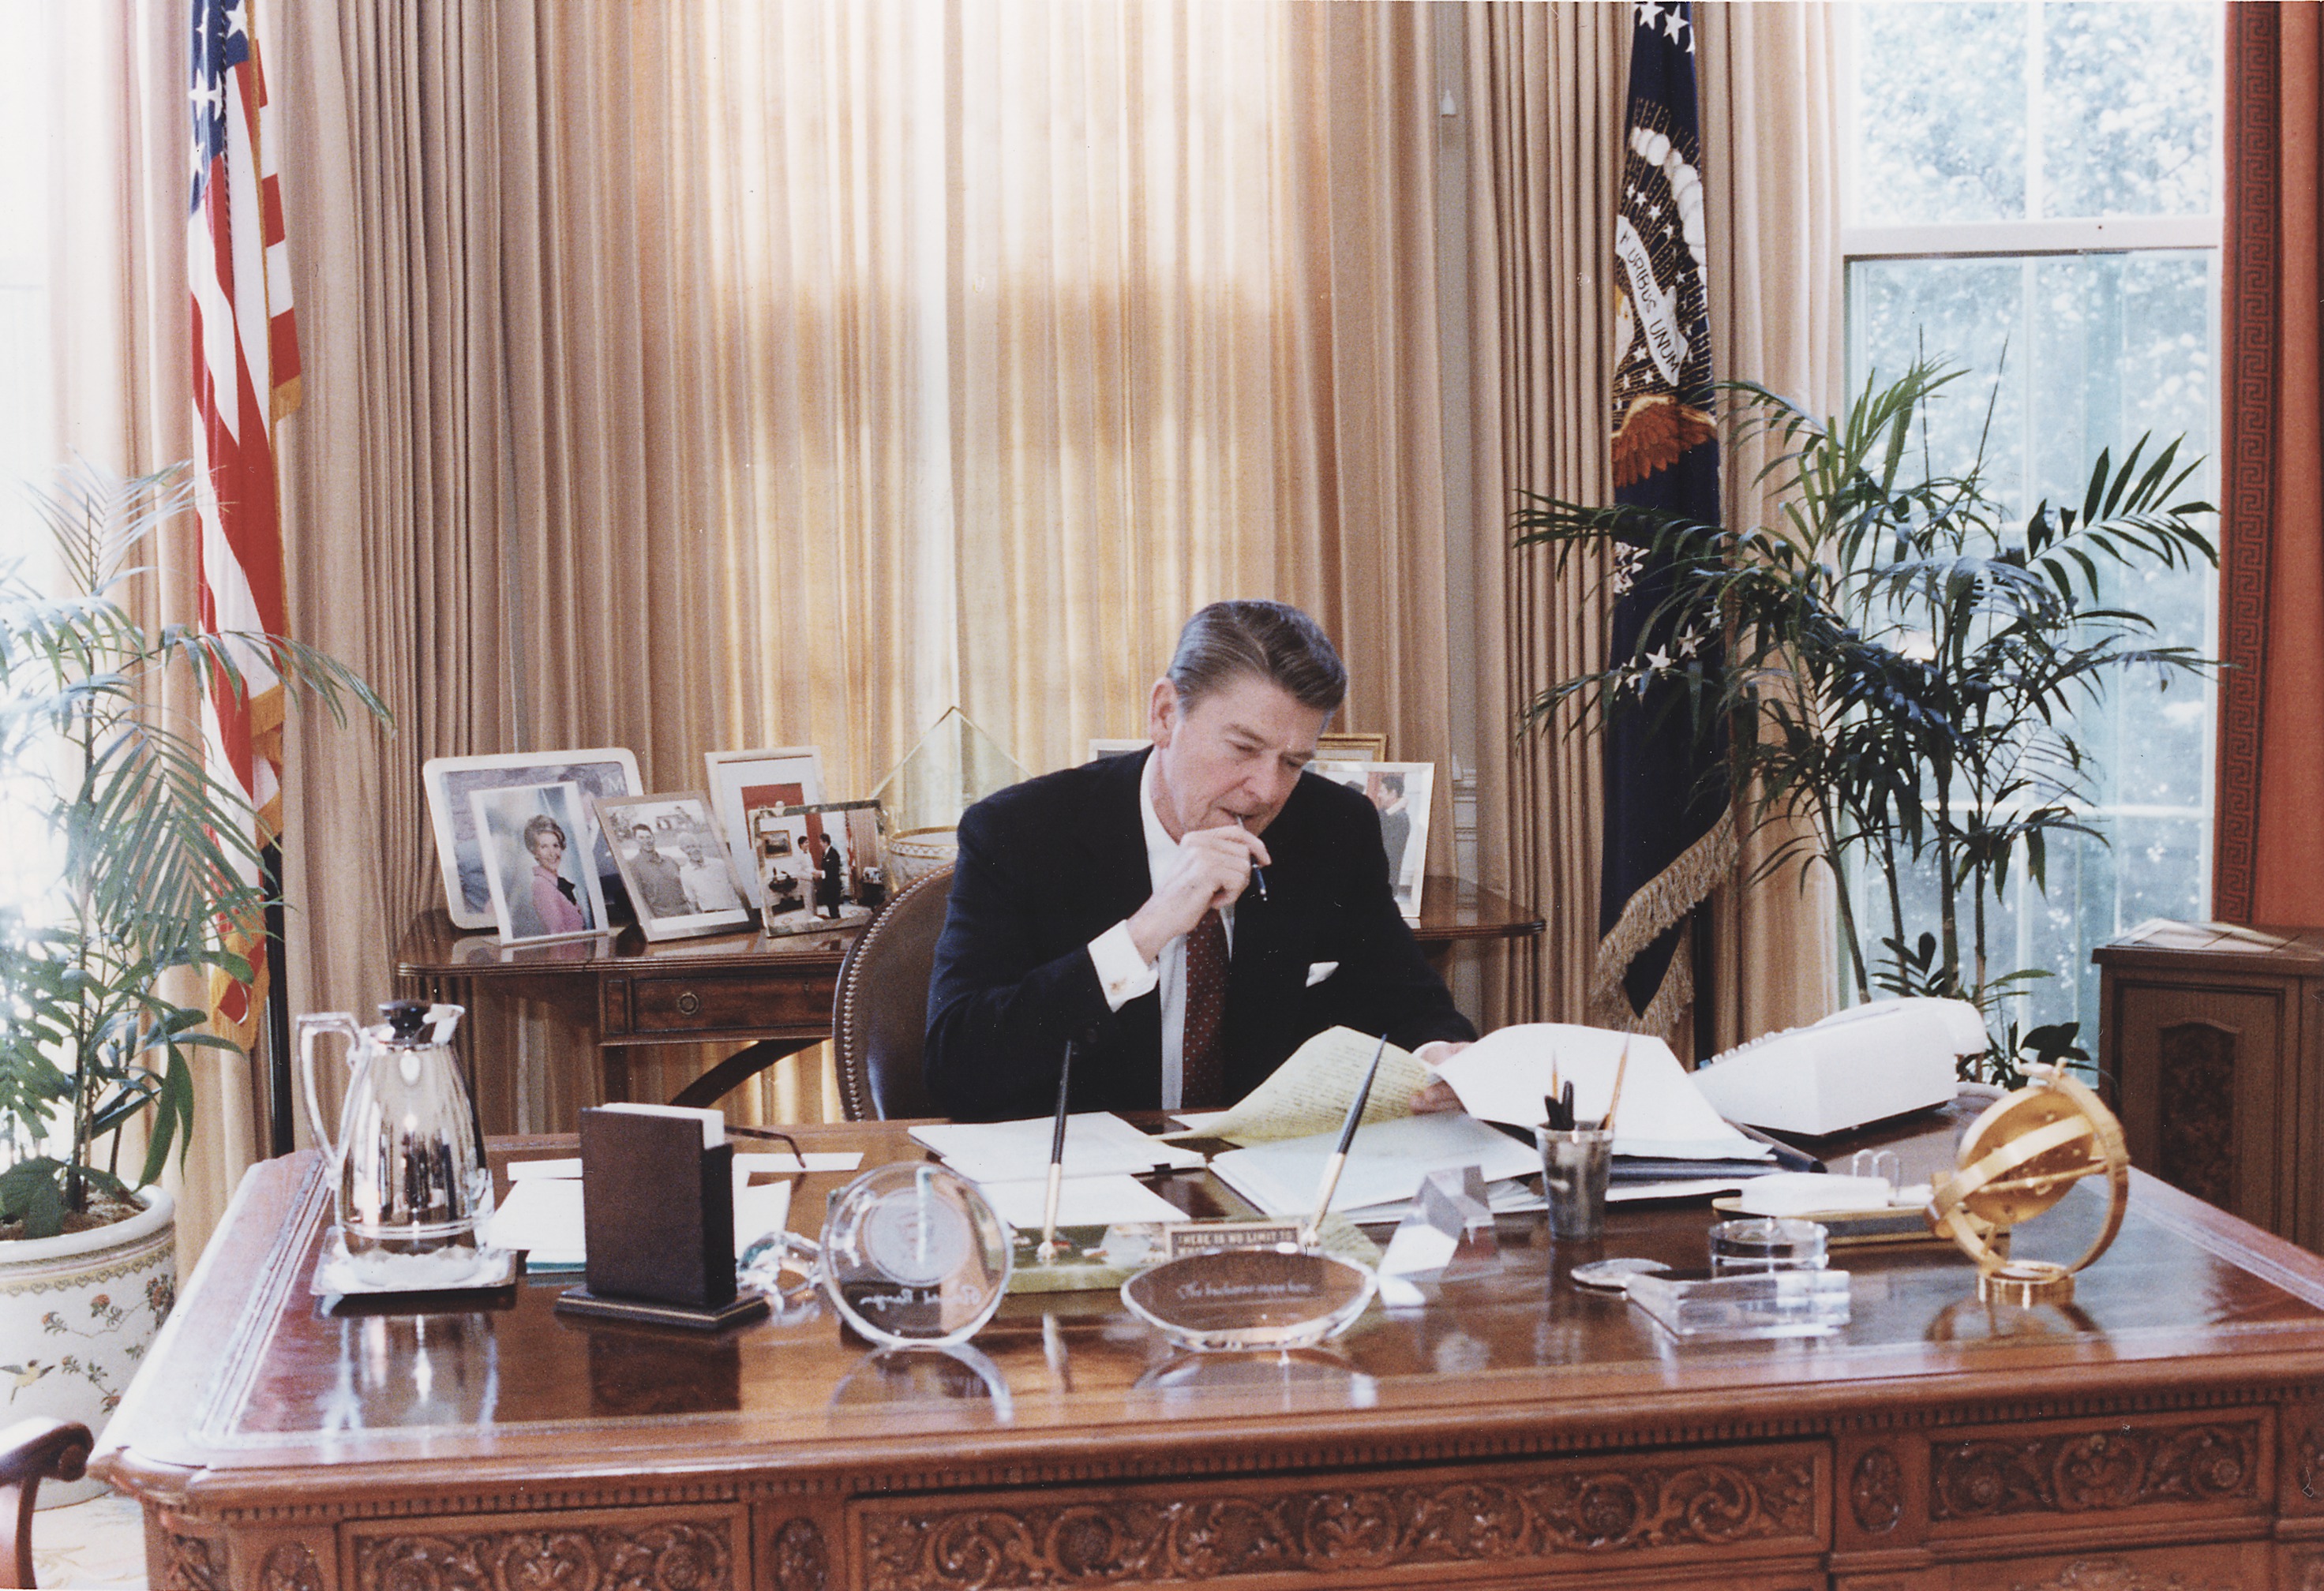 https://upload.wikimedia.org/wikipedia/commons/a/a9/Photograph_of_President_Reagan_working_at_his_Oval_Office_desk_-_NARA_-_198526.jpg